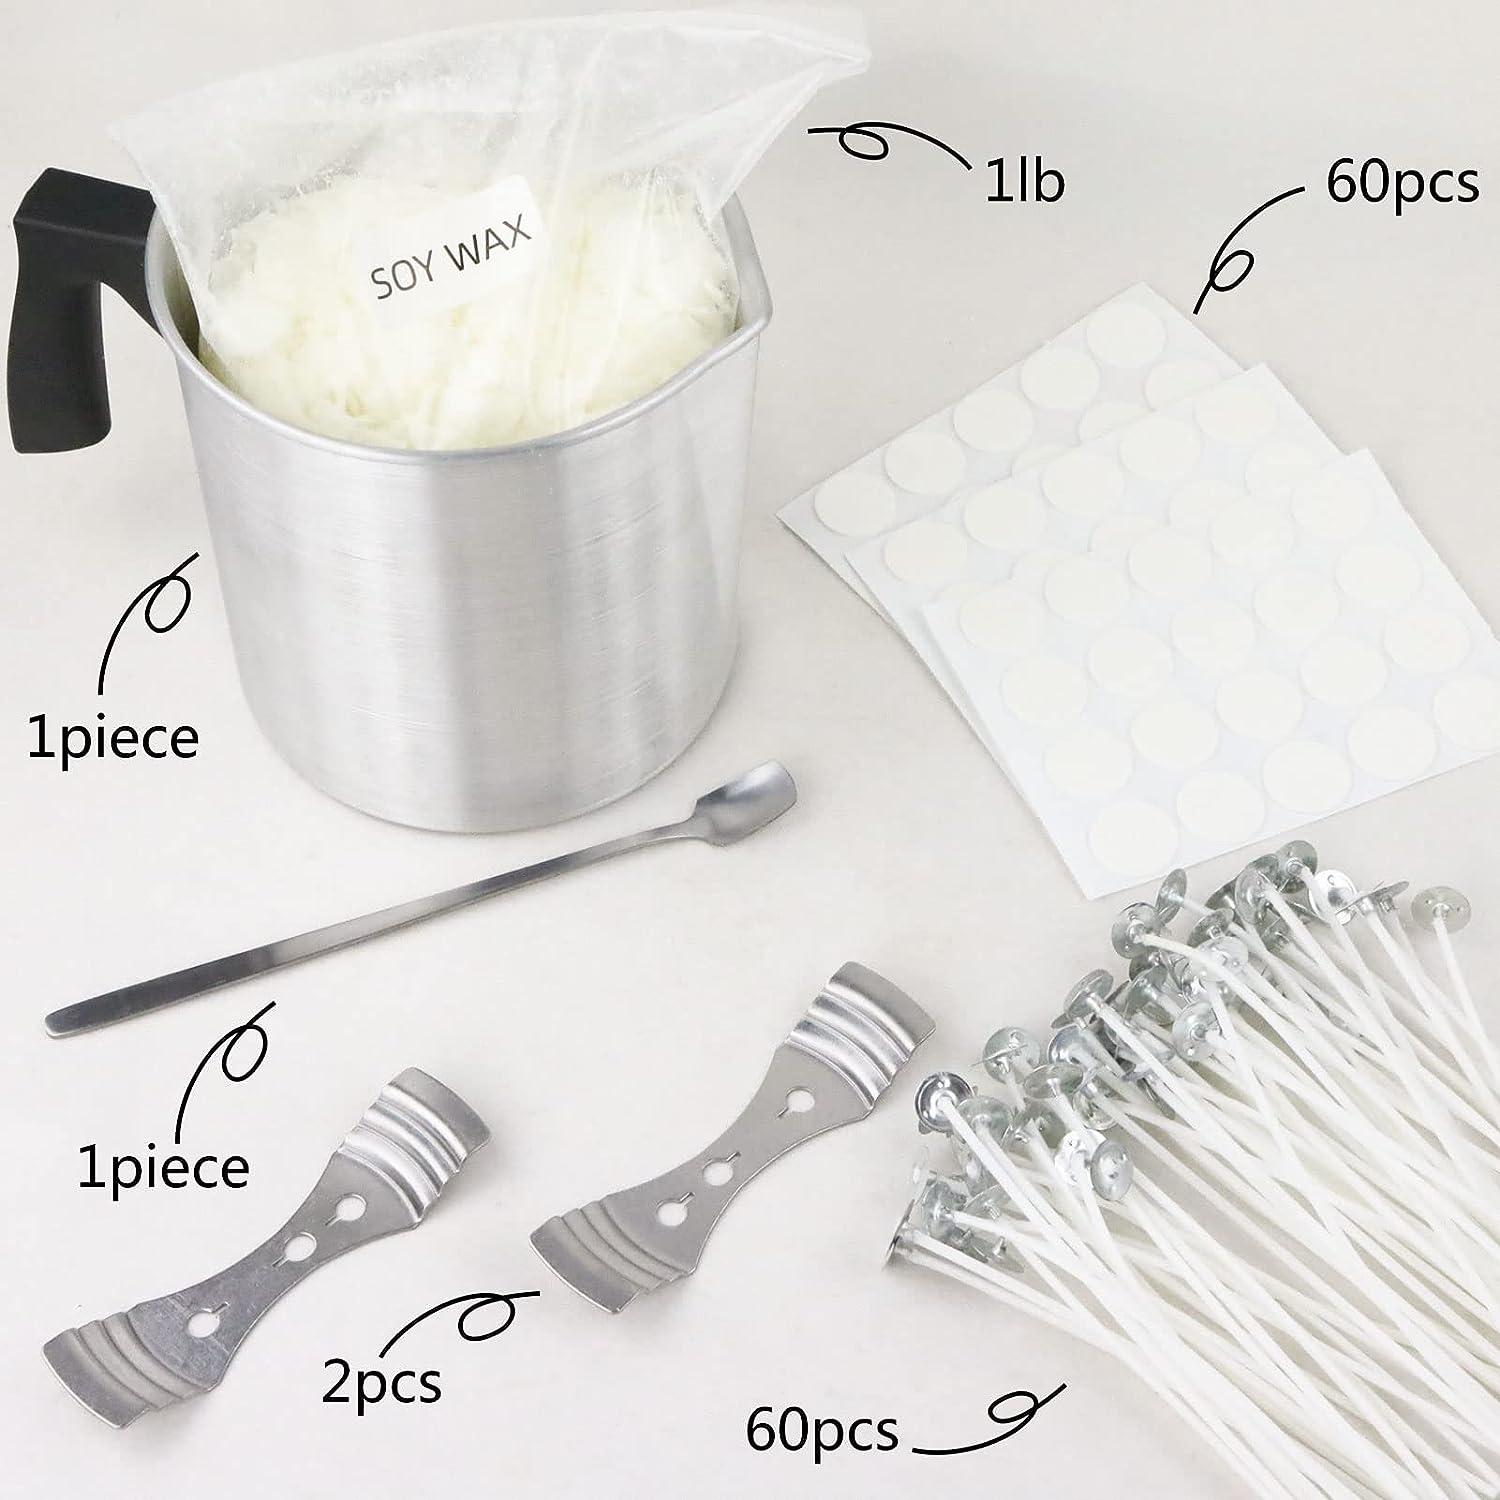 DINGPAI Complete Candle Making Supplies with Hot Plate , Wax Melting Kit  Including Candle Pouring Pot, Soy Wax, Wicks Sticker, 3-Hole Candle Wicks